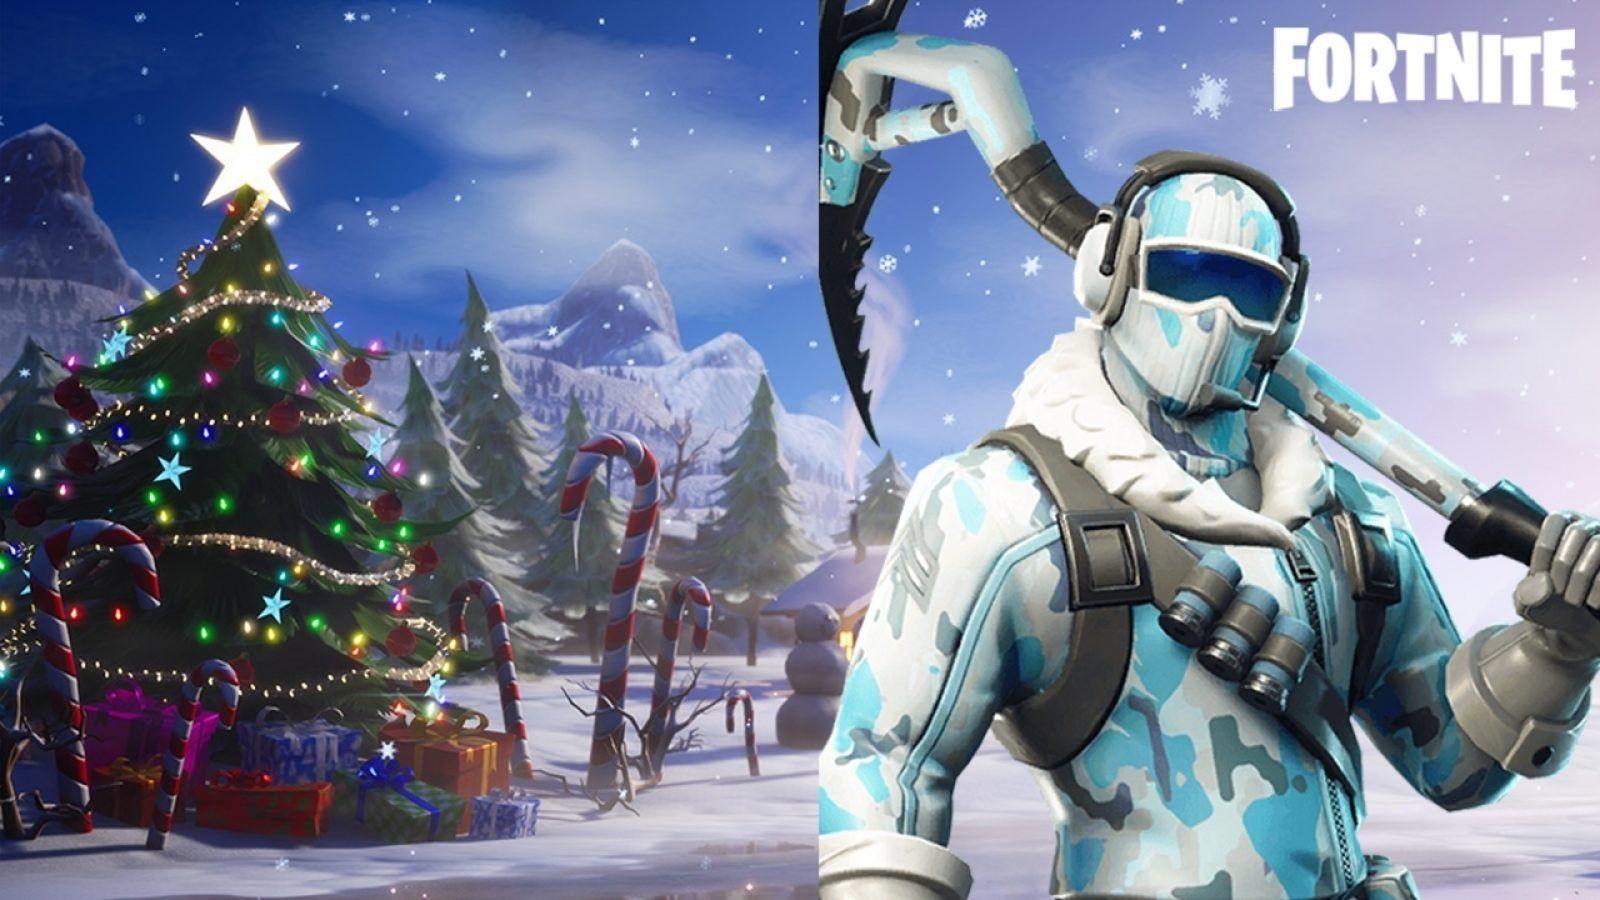 Fortnite: Multiple v6.31 leaks appear to confirm a snow theme